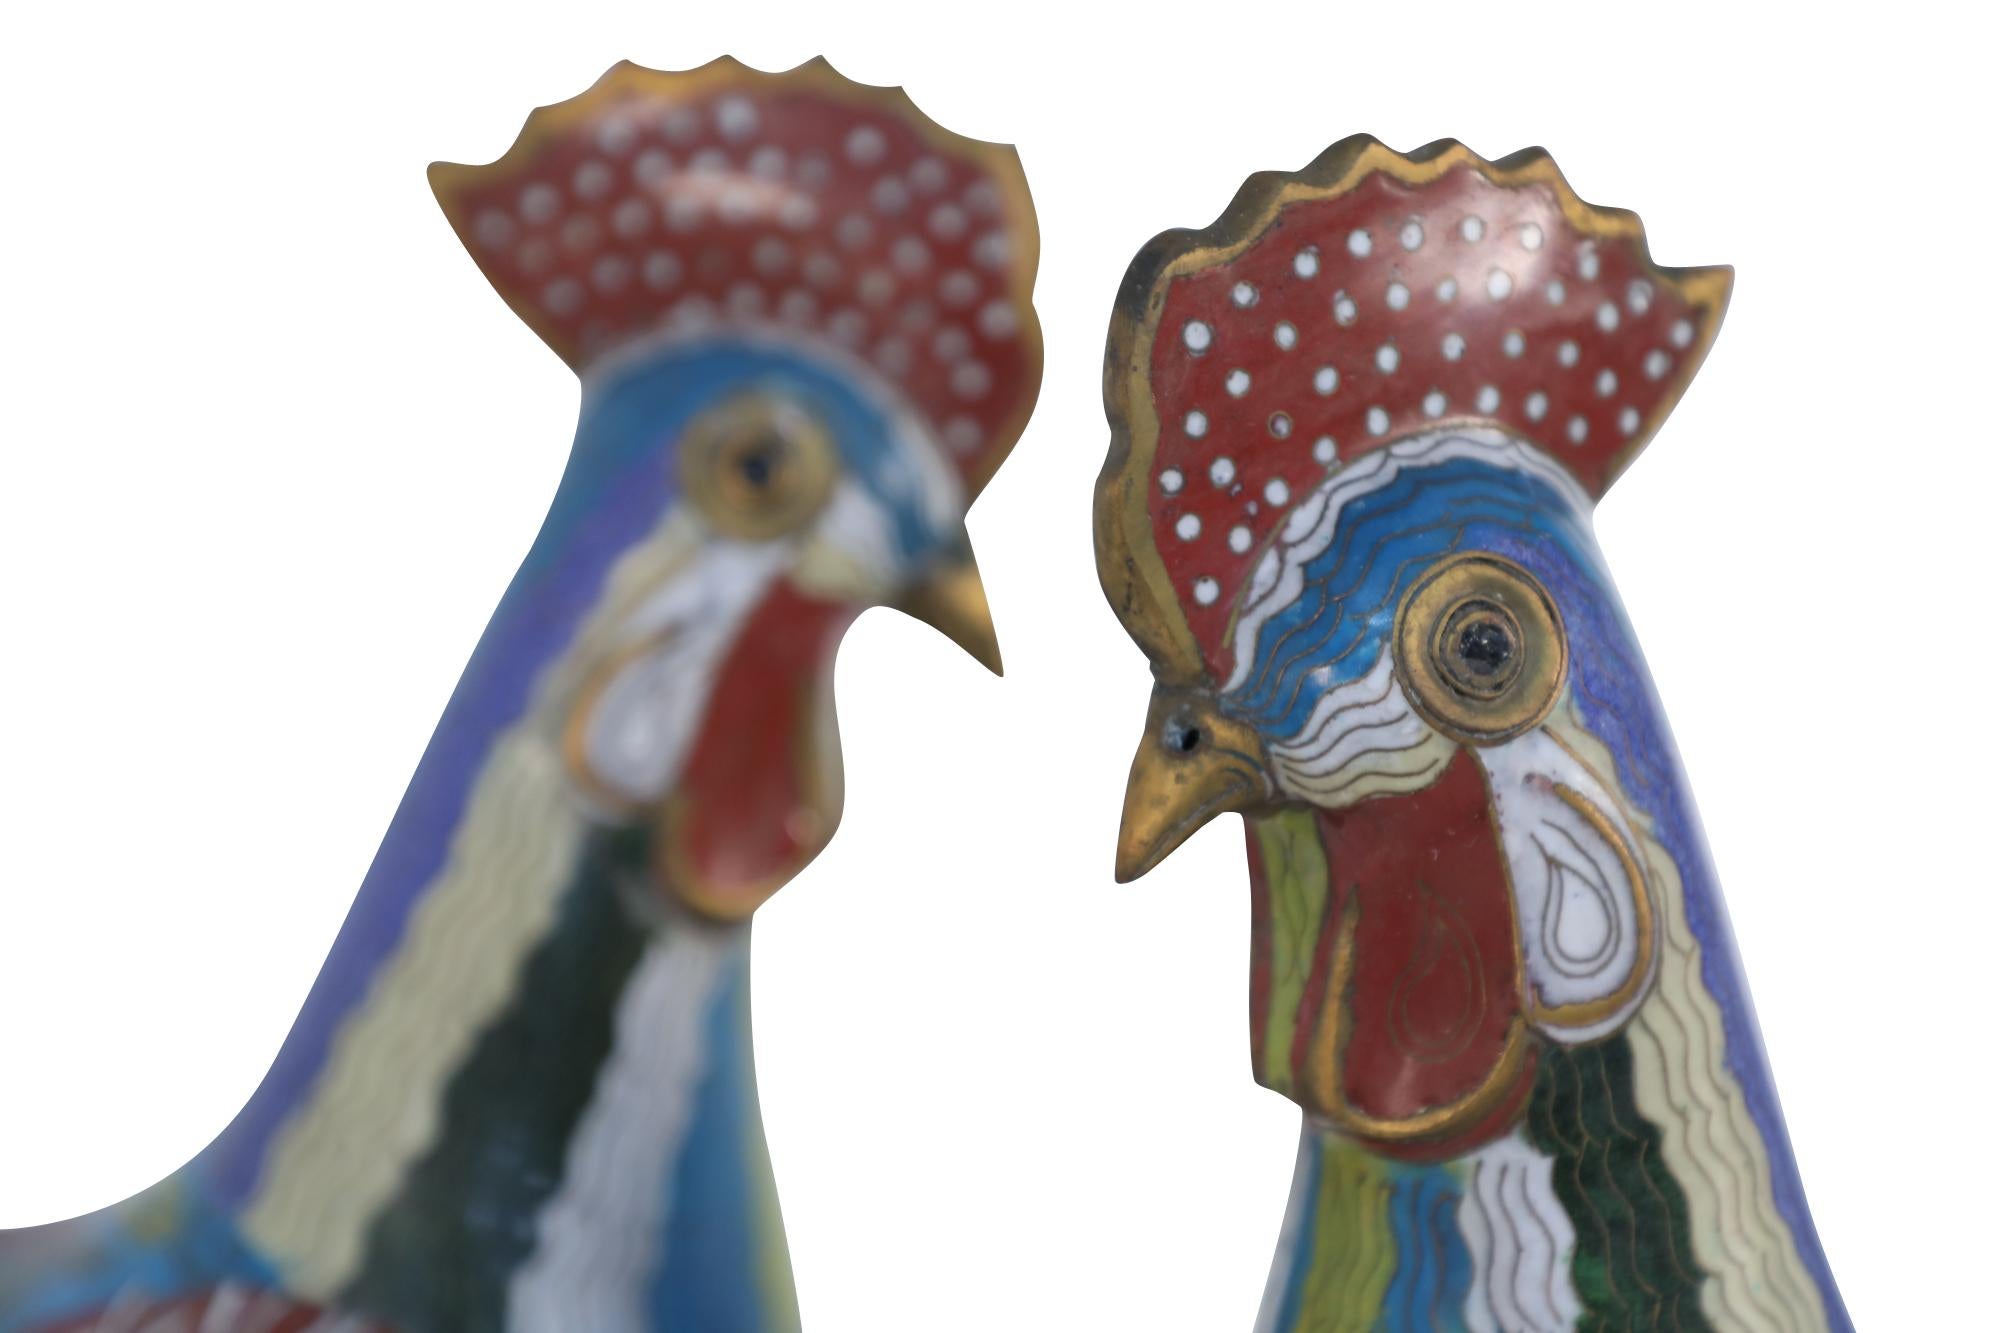 Pair of Early 20th Century Chinese Multi-Colored Cloisonne Rooster Sculptures For Sale 4